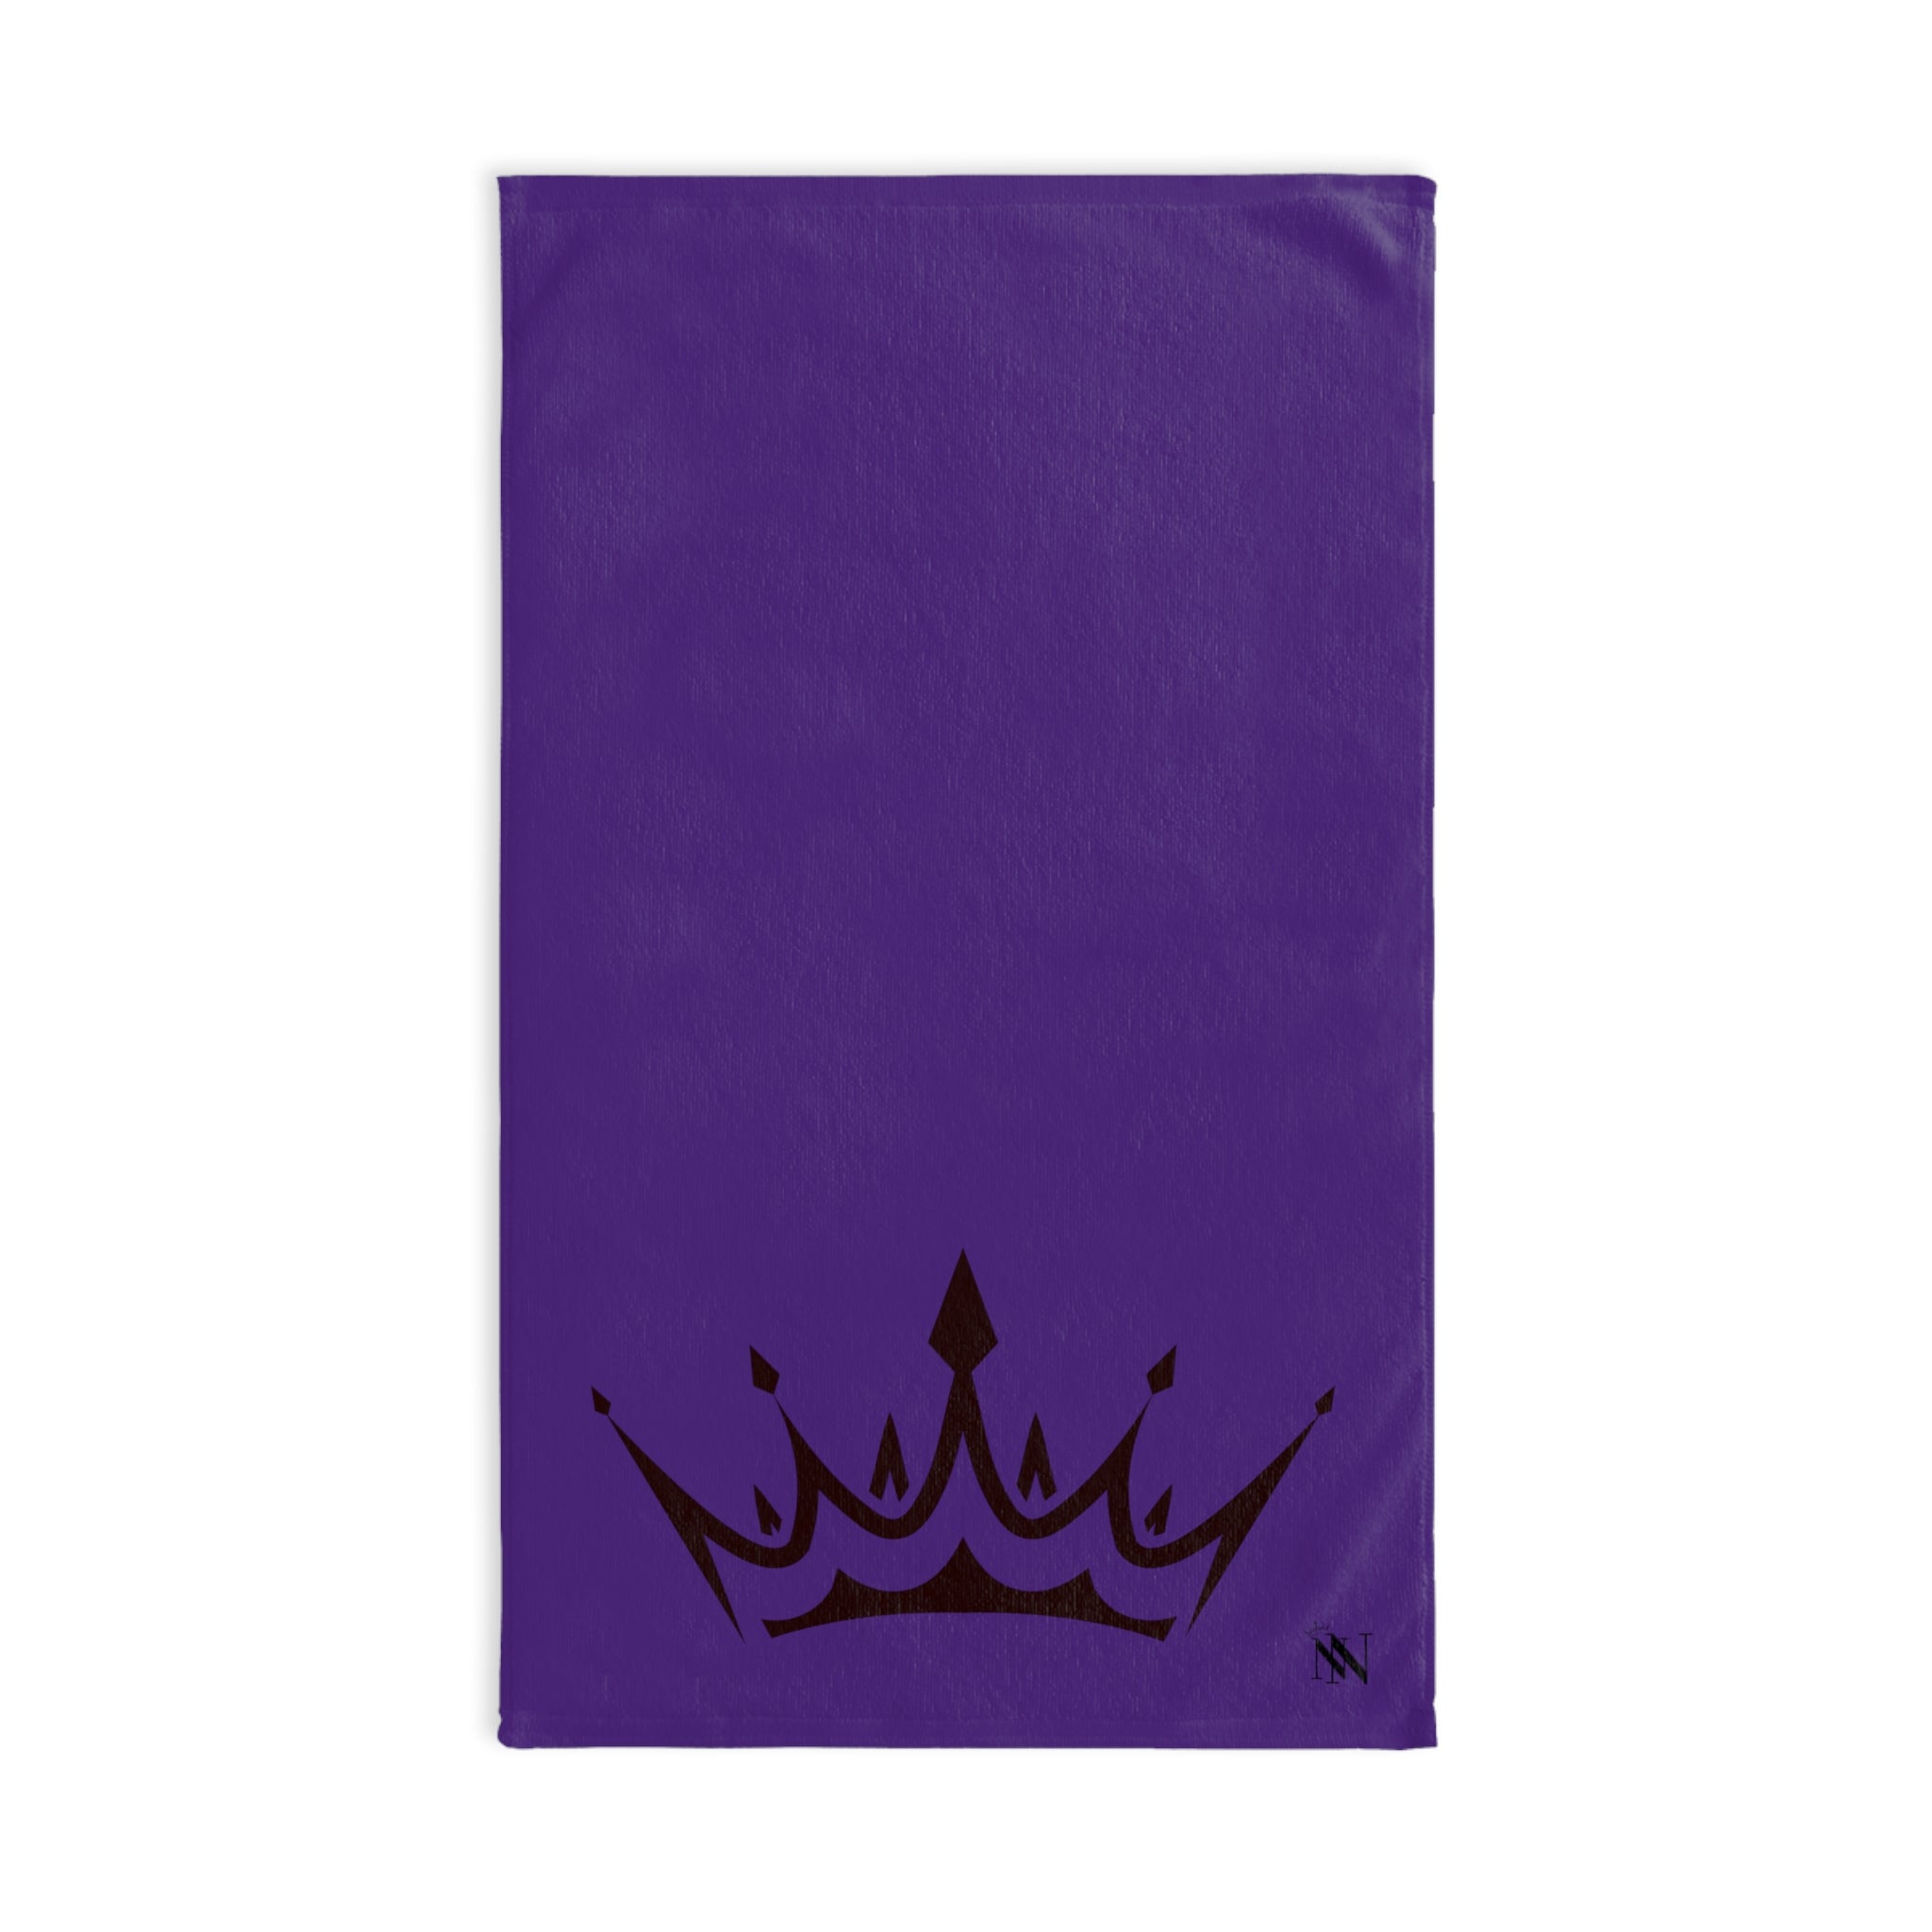 Black Crown Purple | Funny Gifts for Men - Gifts for Him - Birthday Gifts for Men, Him, Husband, Boyfriend, New Couple Gifts, Fathers & Valentines Day Gifts, Christmas Gifts NECTAR NAPKINS